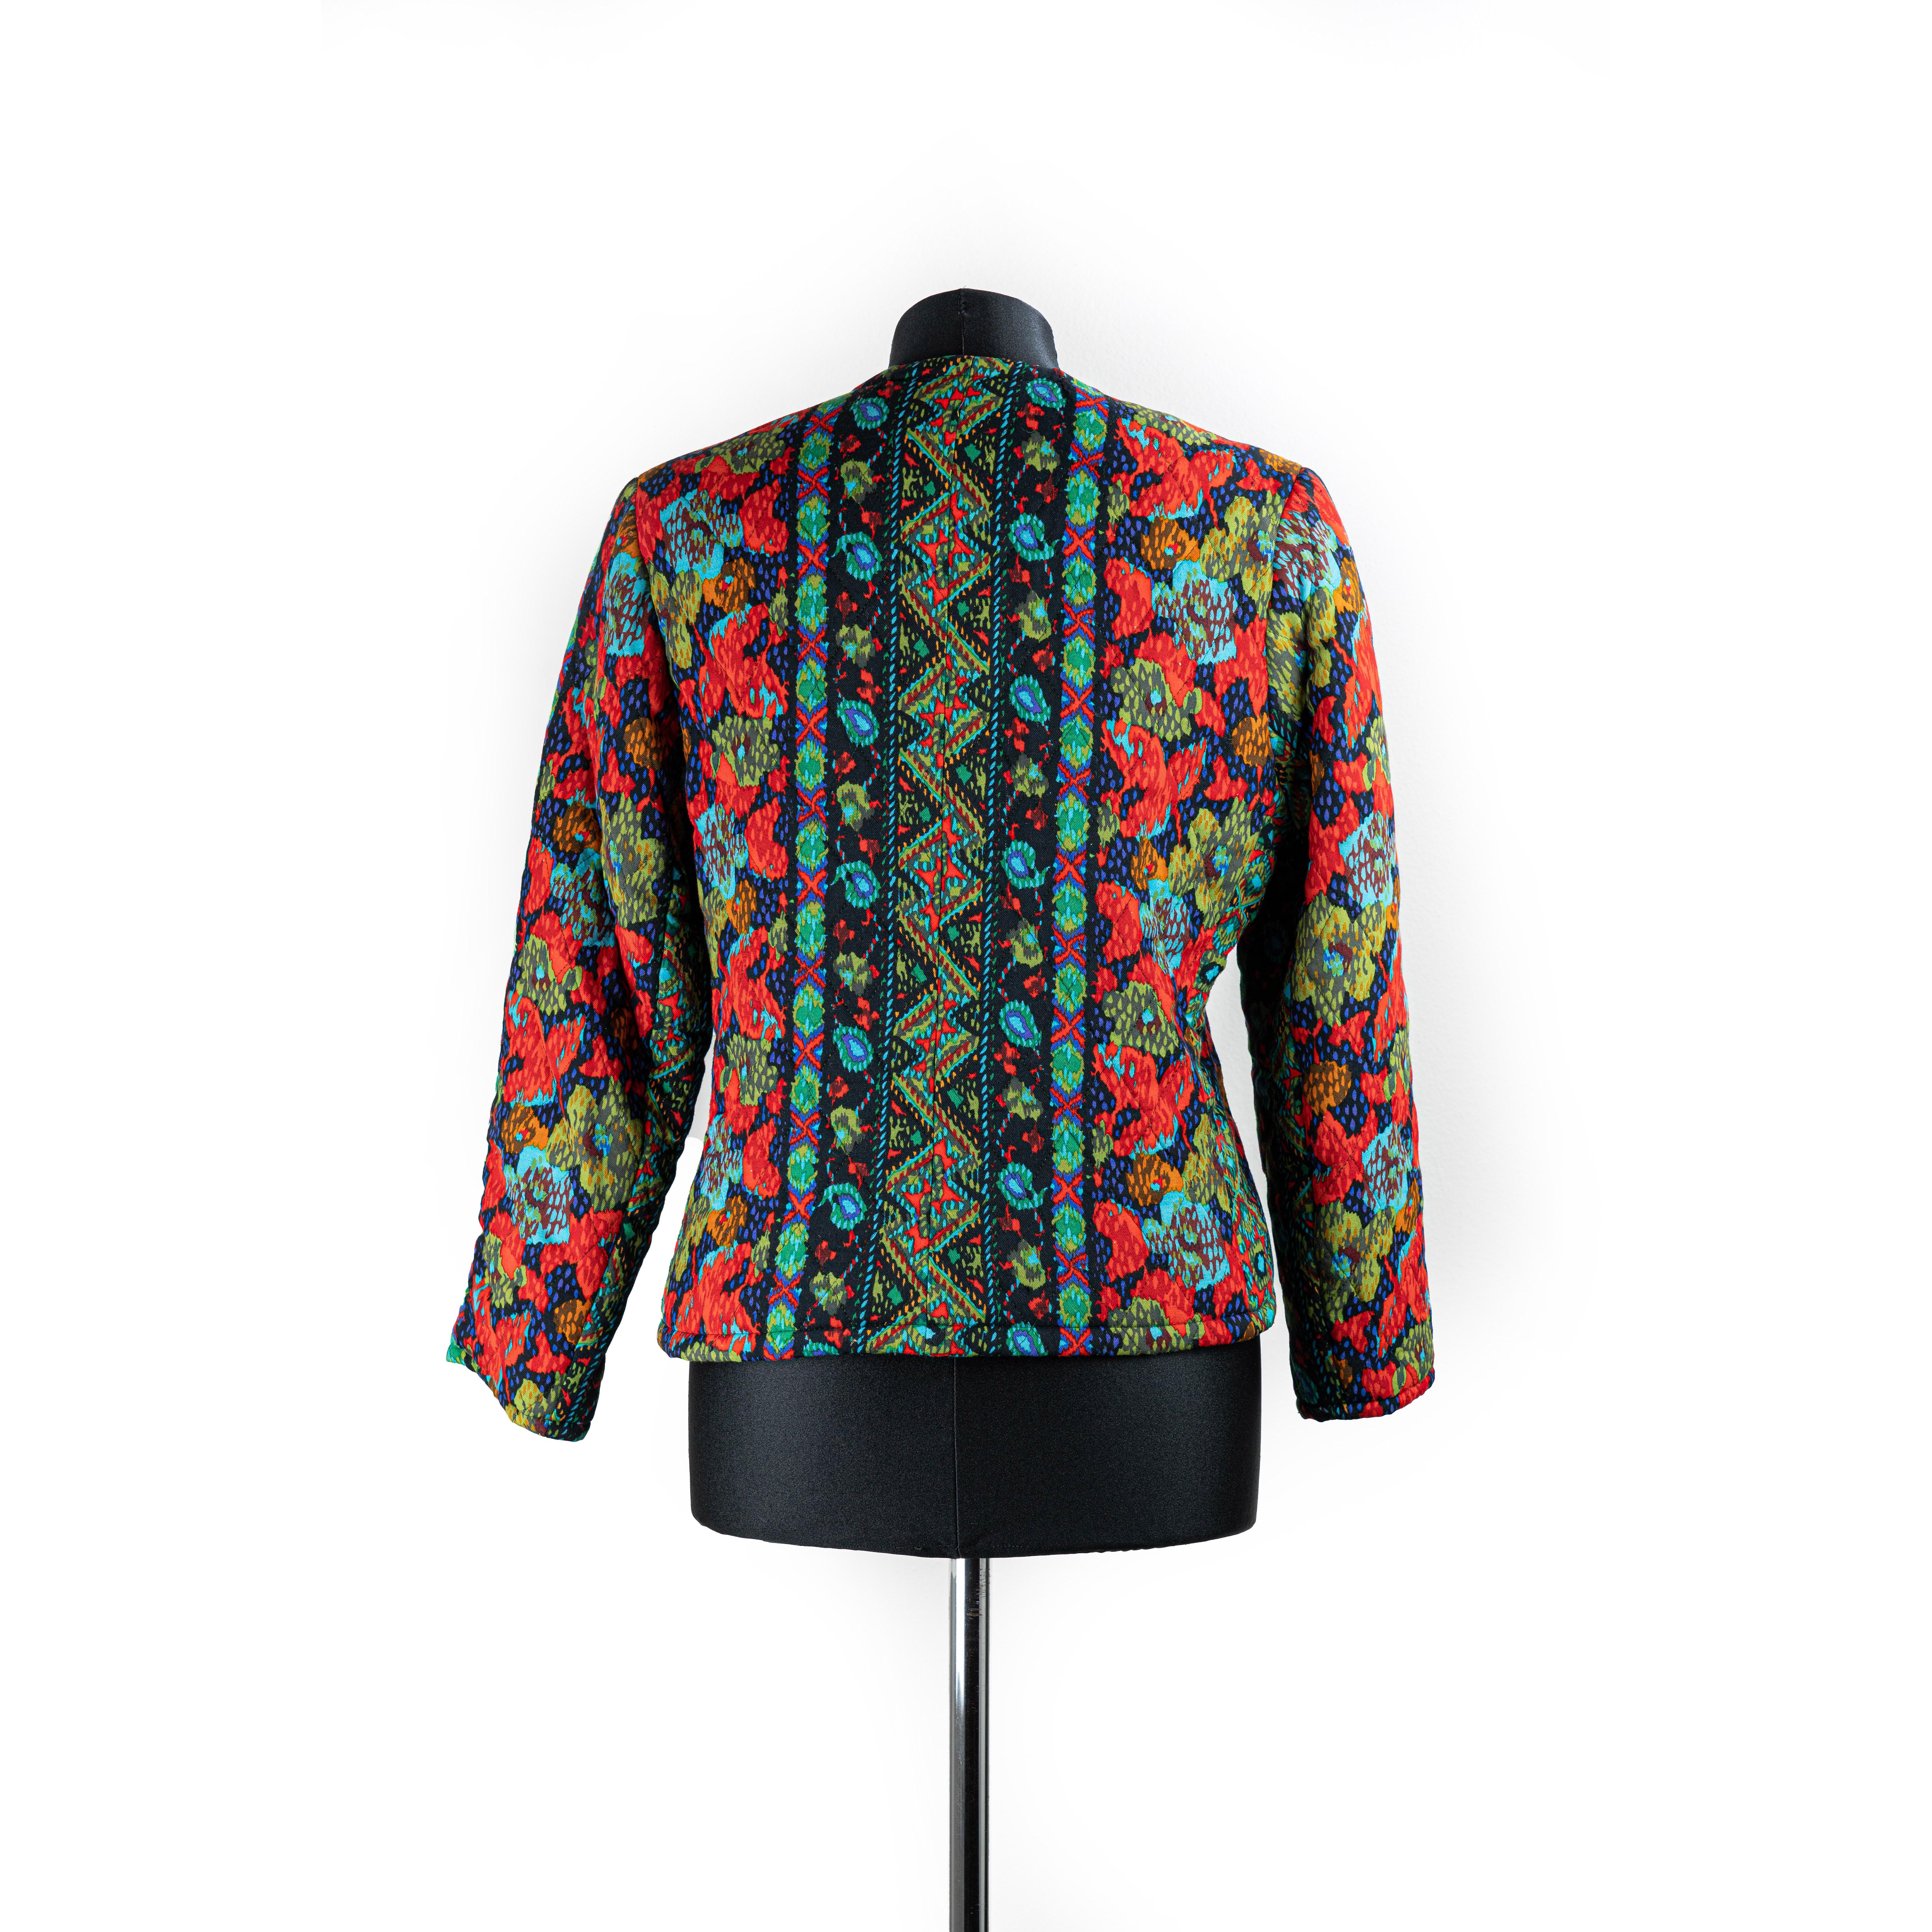 Vintage Yves Saint Laurent Variation Jacket. Early 70s.
Very particular quilted Russian paisley floral print jacket.
A mix of wool and silk that create a very soft and comfy fabric.
It features a V neck line, a front button down closure and two